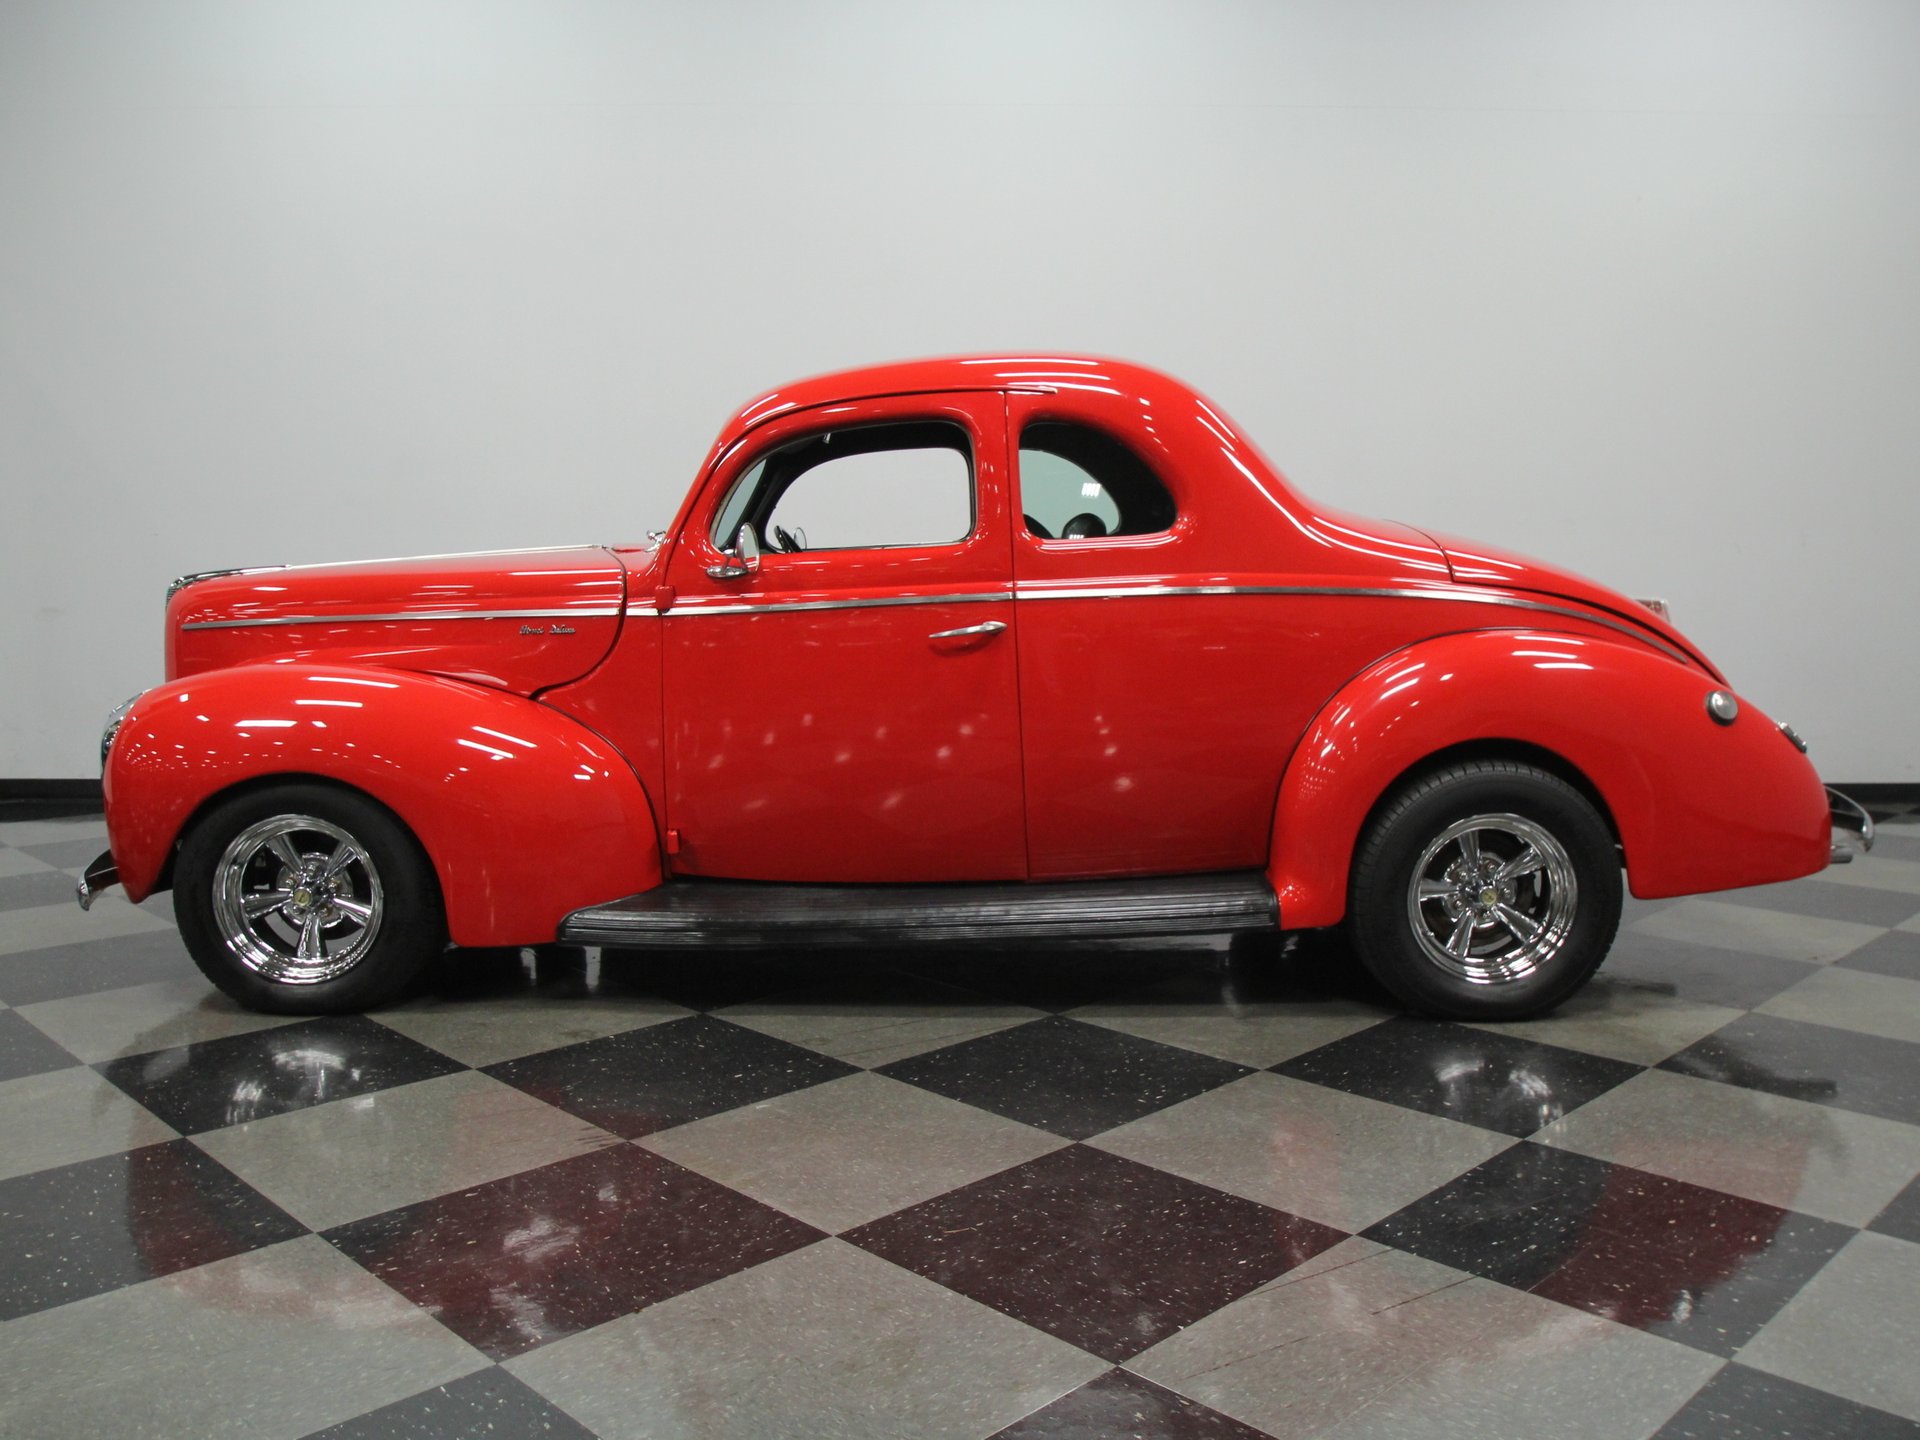 1940 ford deluxe coupe